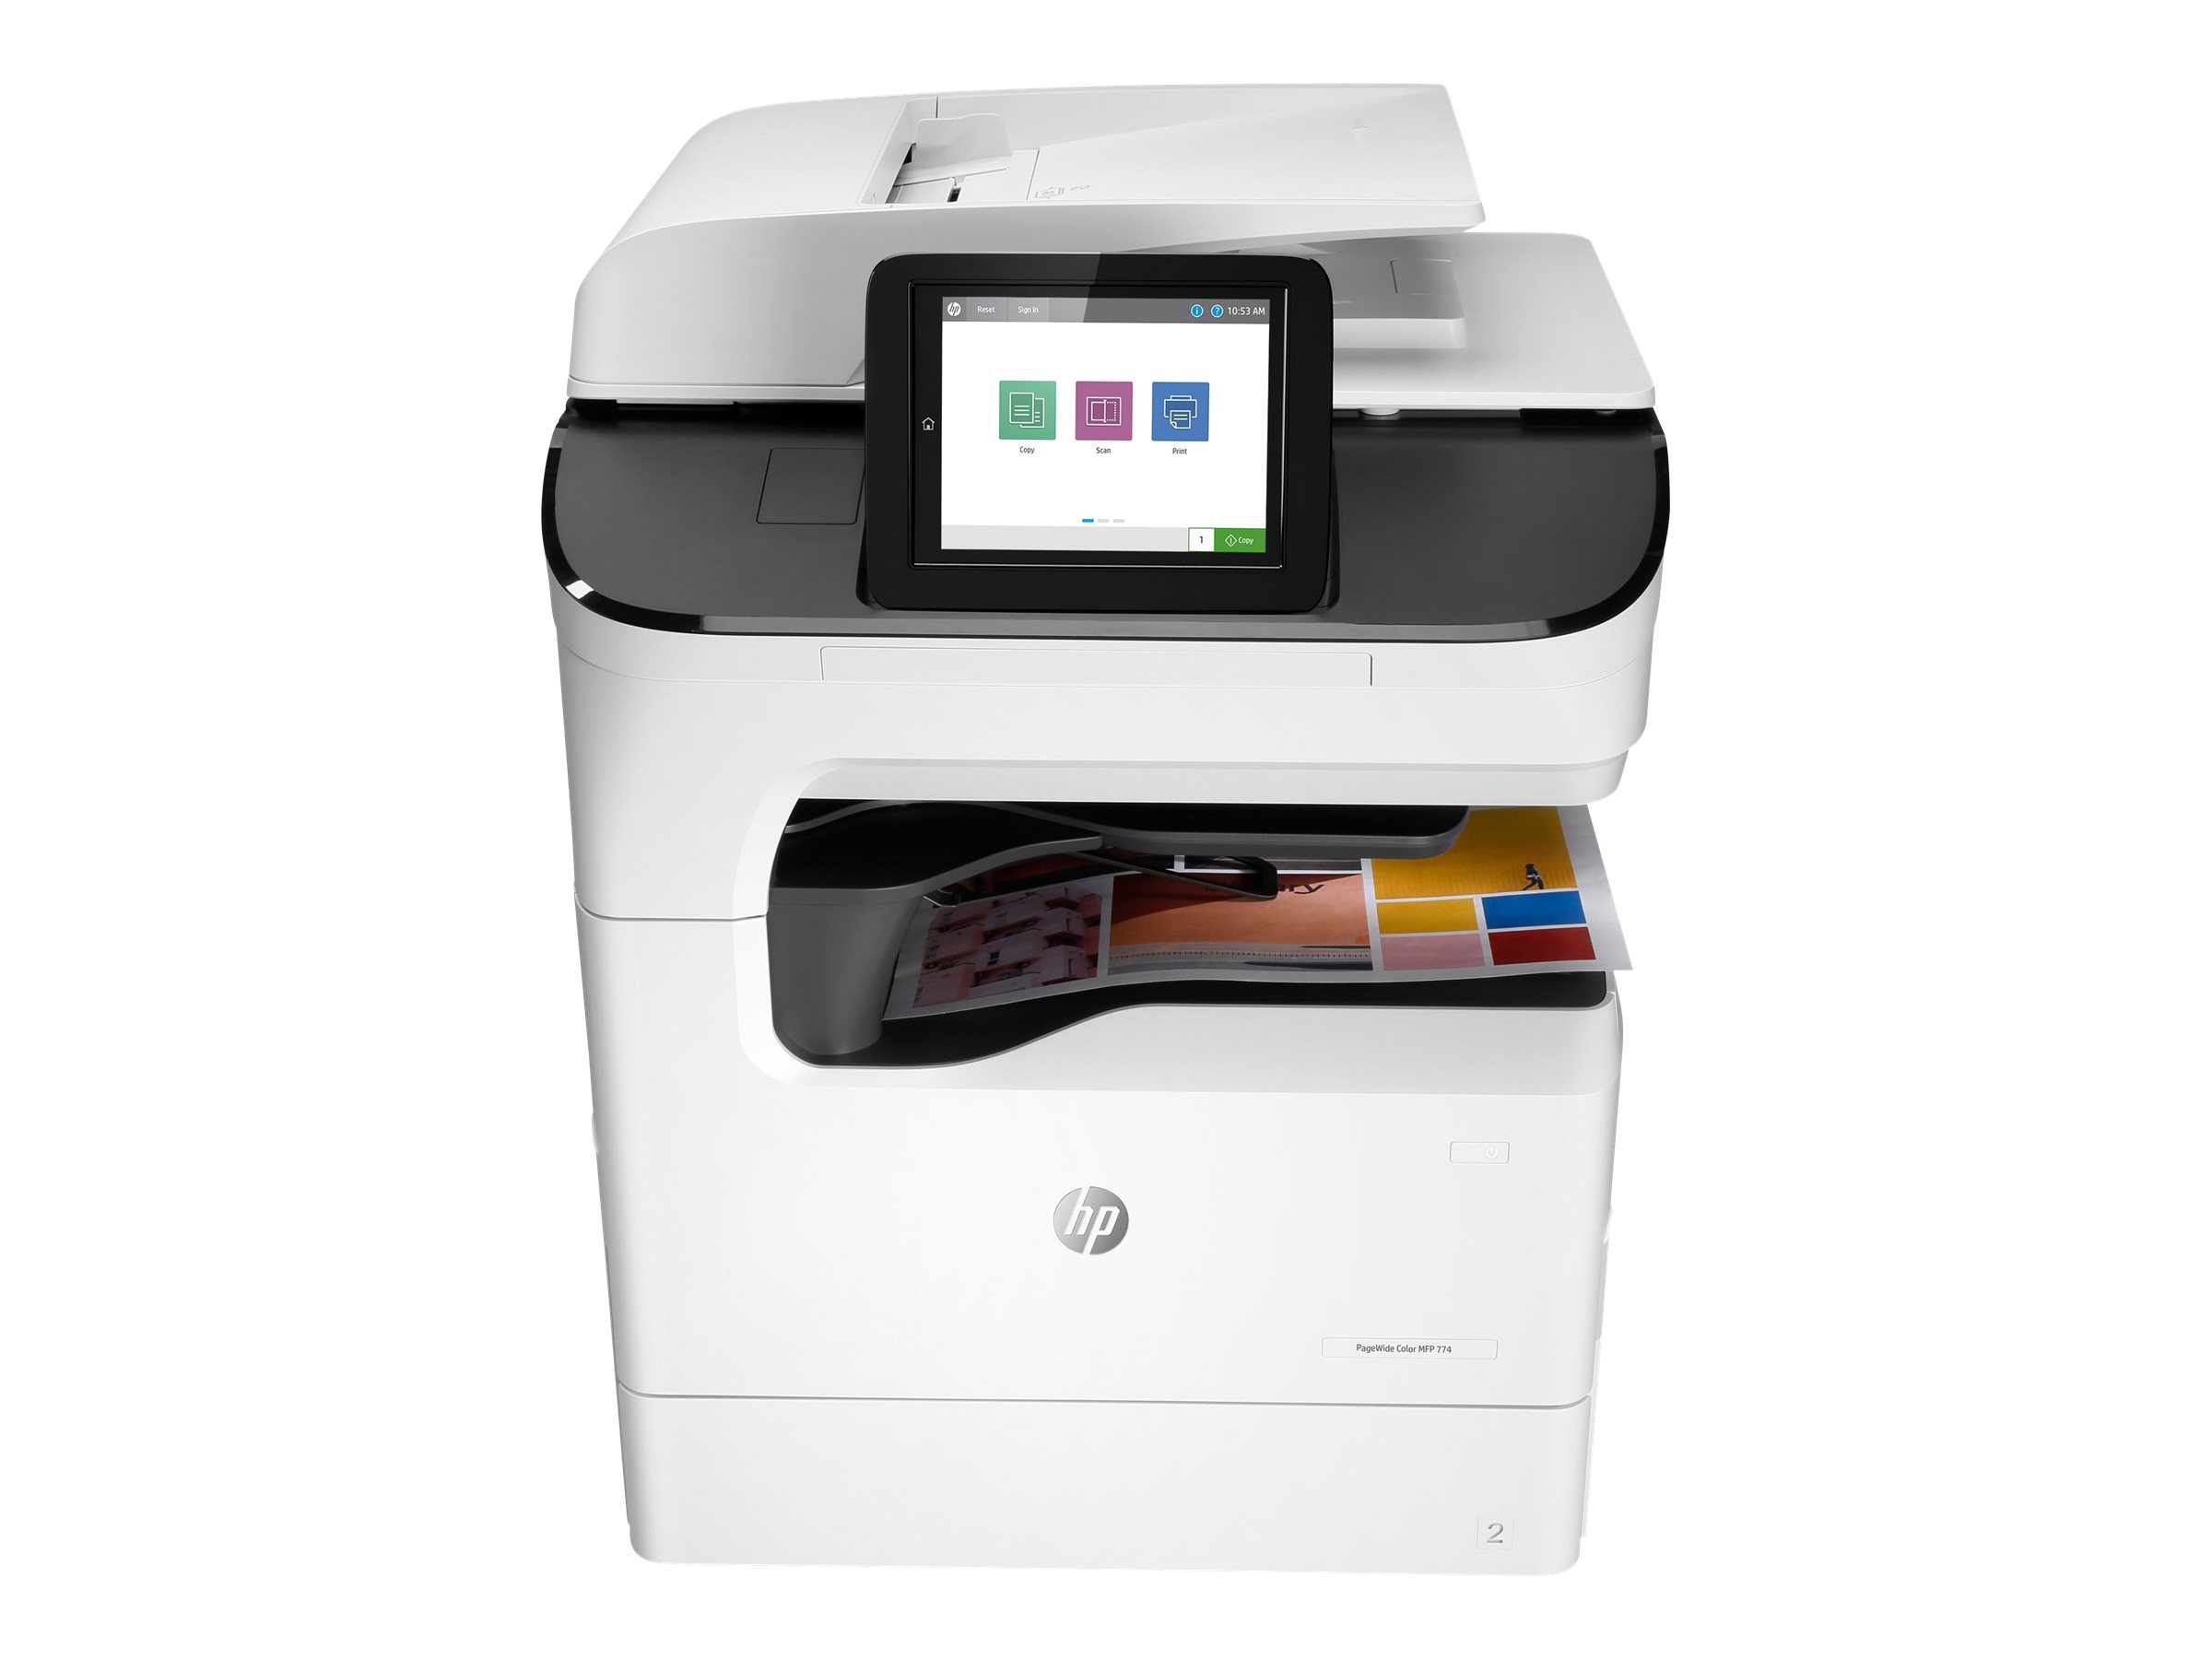 PageWide Color MFP 774 Printer series